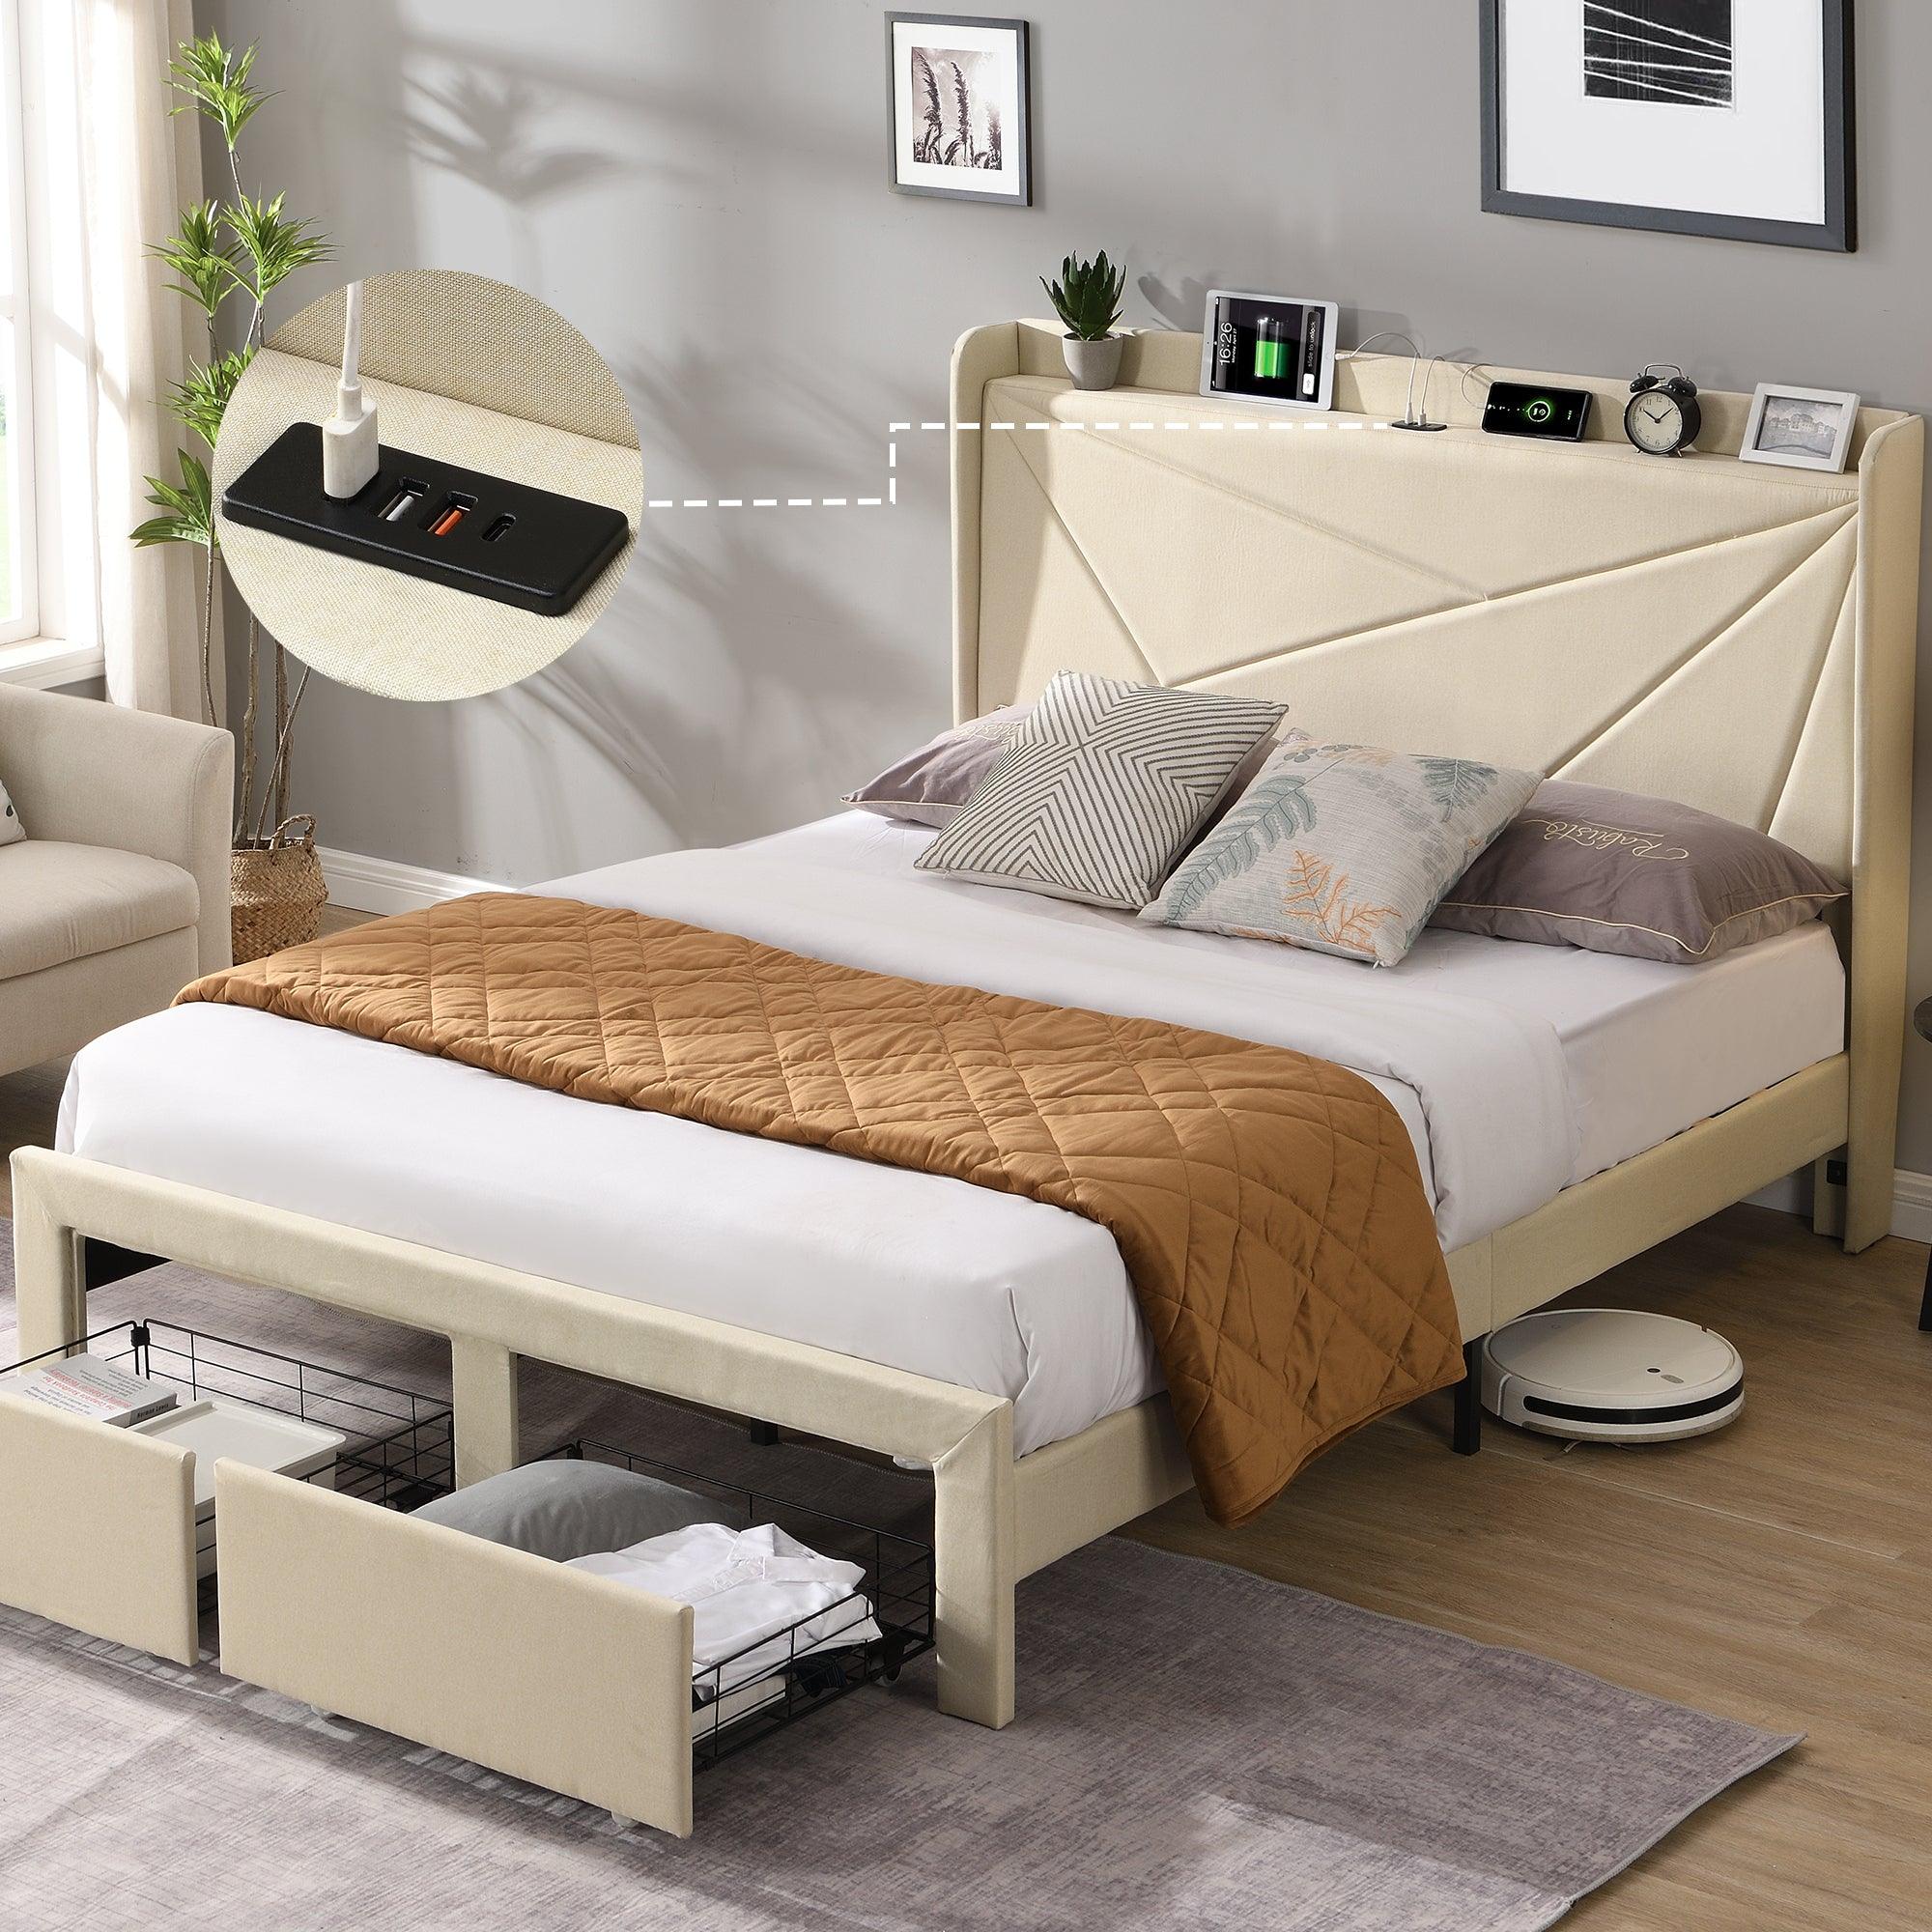 🆓🚛 Full Size Upholstered Bed Frame With Wingback Headboard, 2 Storage Drawers, Storage Shelf, Built-in Usb Charging Station, Beige